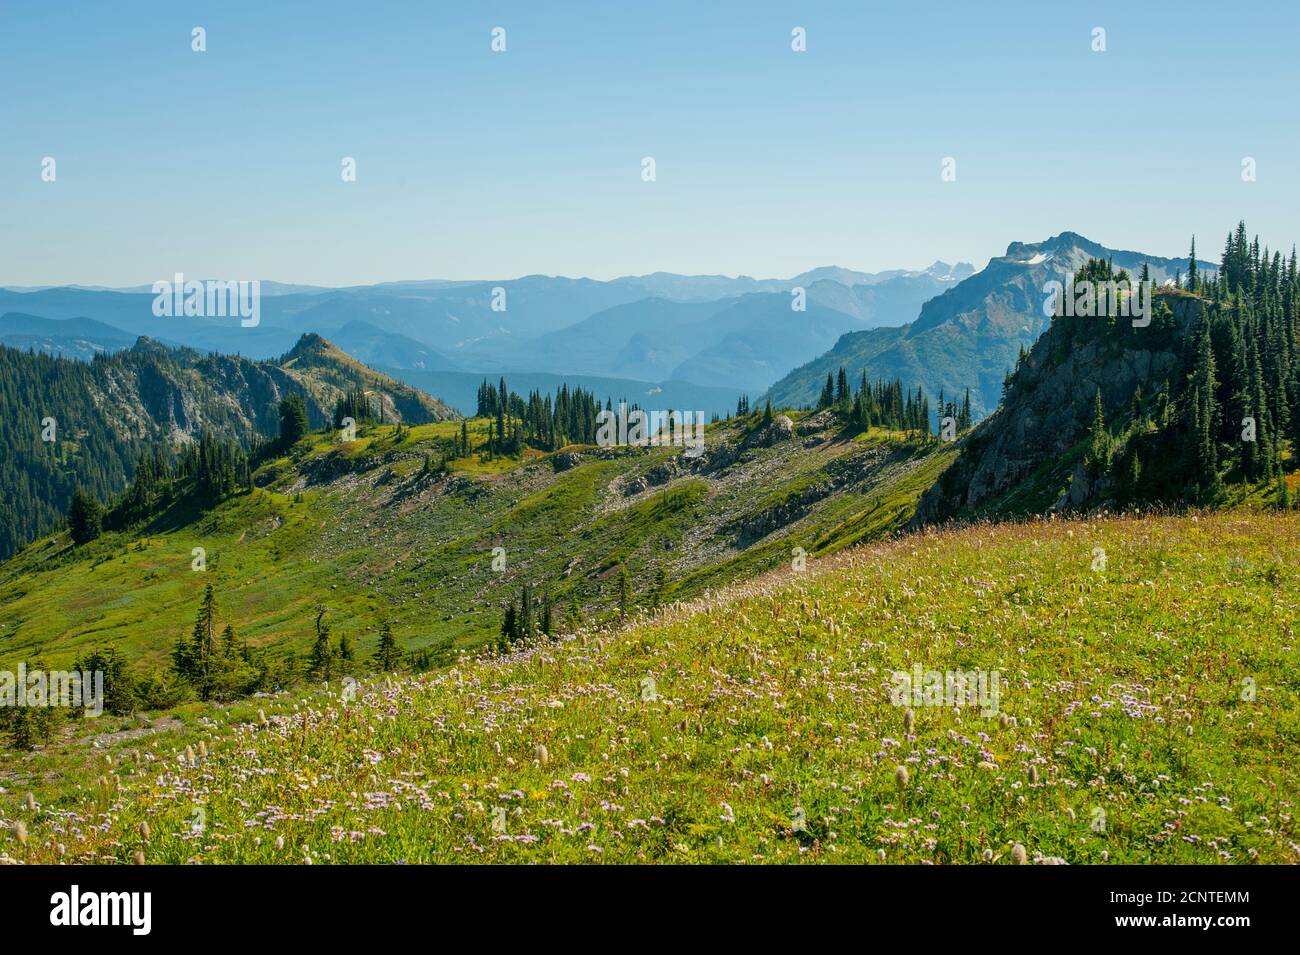 View from the Skyline Trail near Panorama Point of the Tatoosh Range in Mt. Rainier National Park in Washington State, USA. Stock Photo